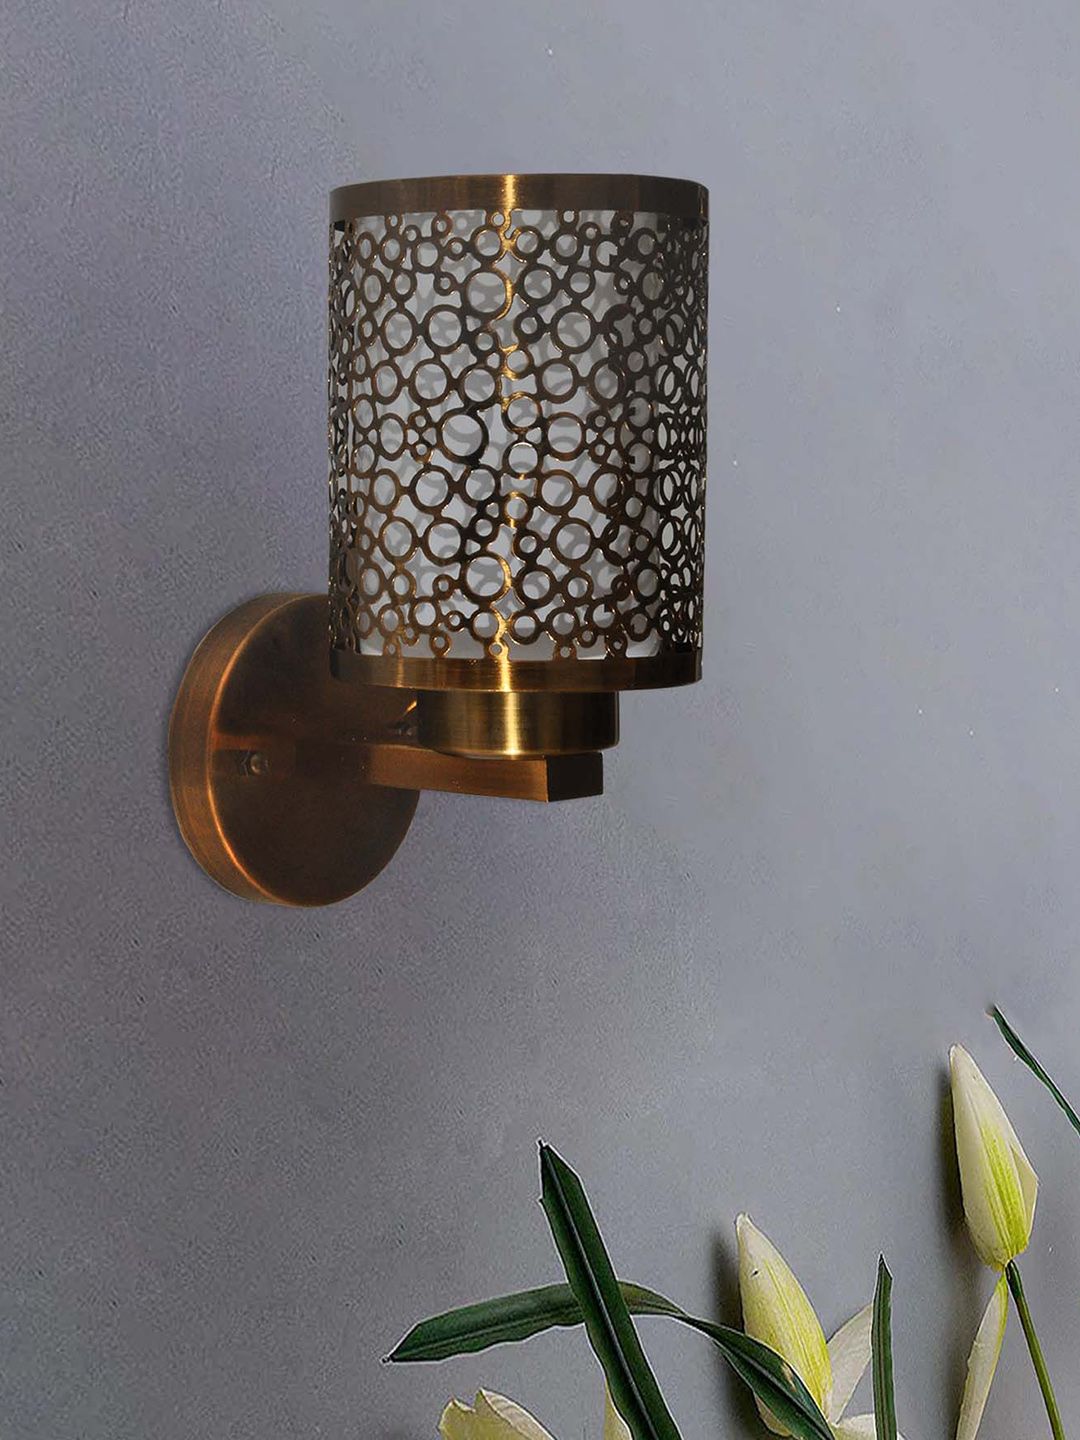 SHREE KALA HOME DECOR Gold-Toned Cylindrical Wall Lamp Price in India